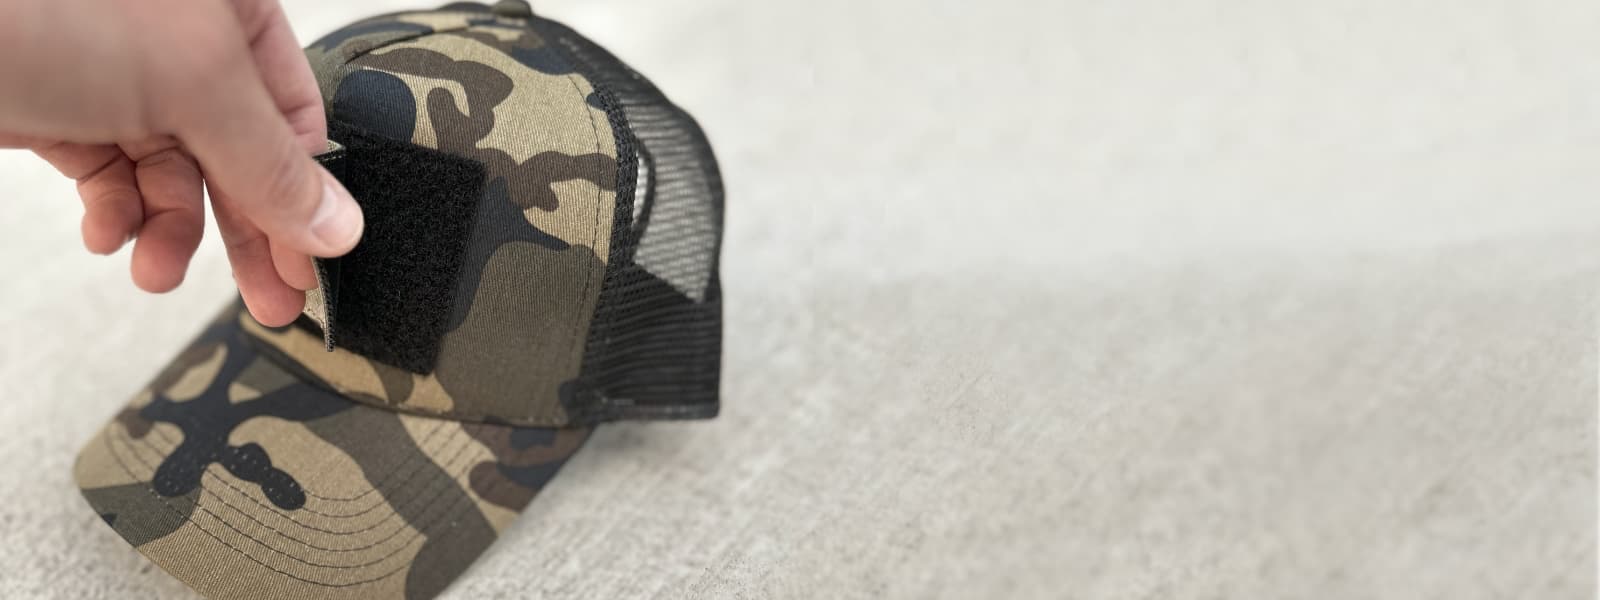 Removing a patch from the Blank Snapback Cap in camo colour